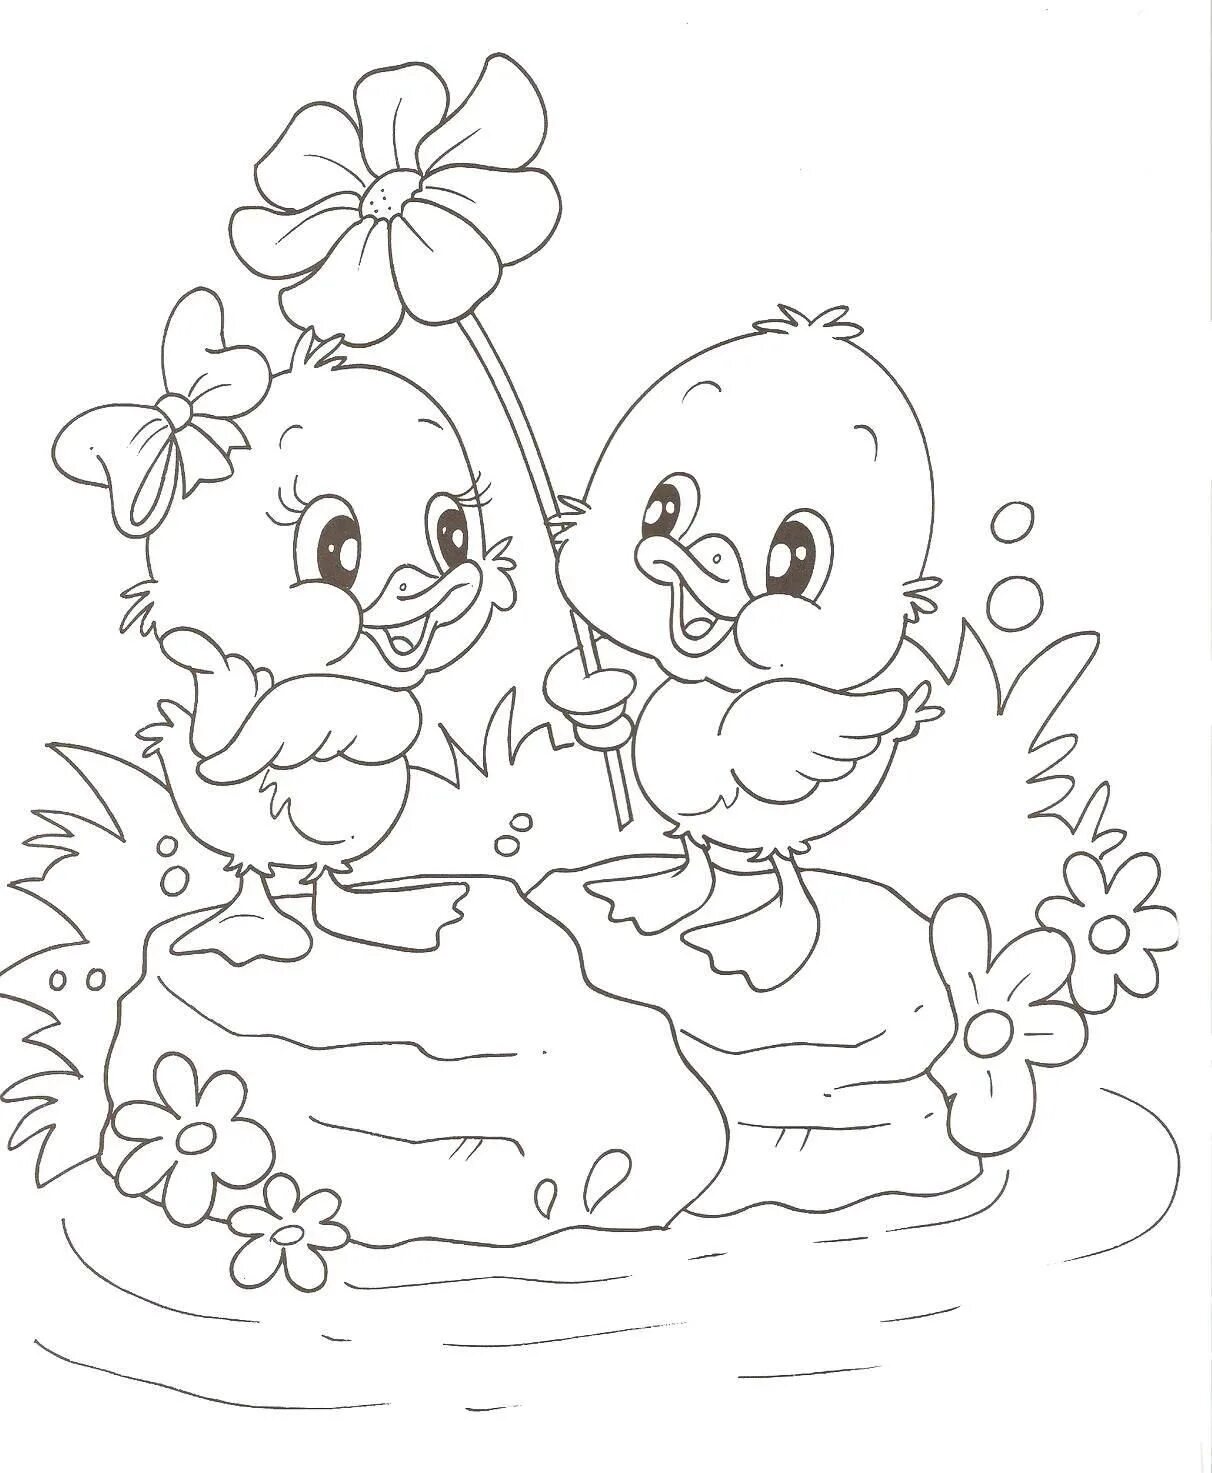 Chicken and duckling #6